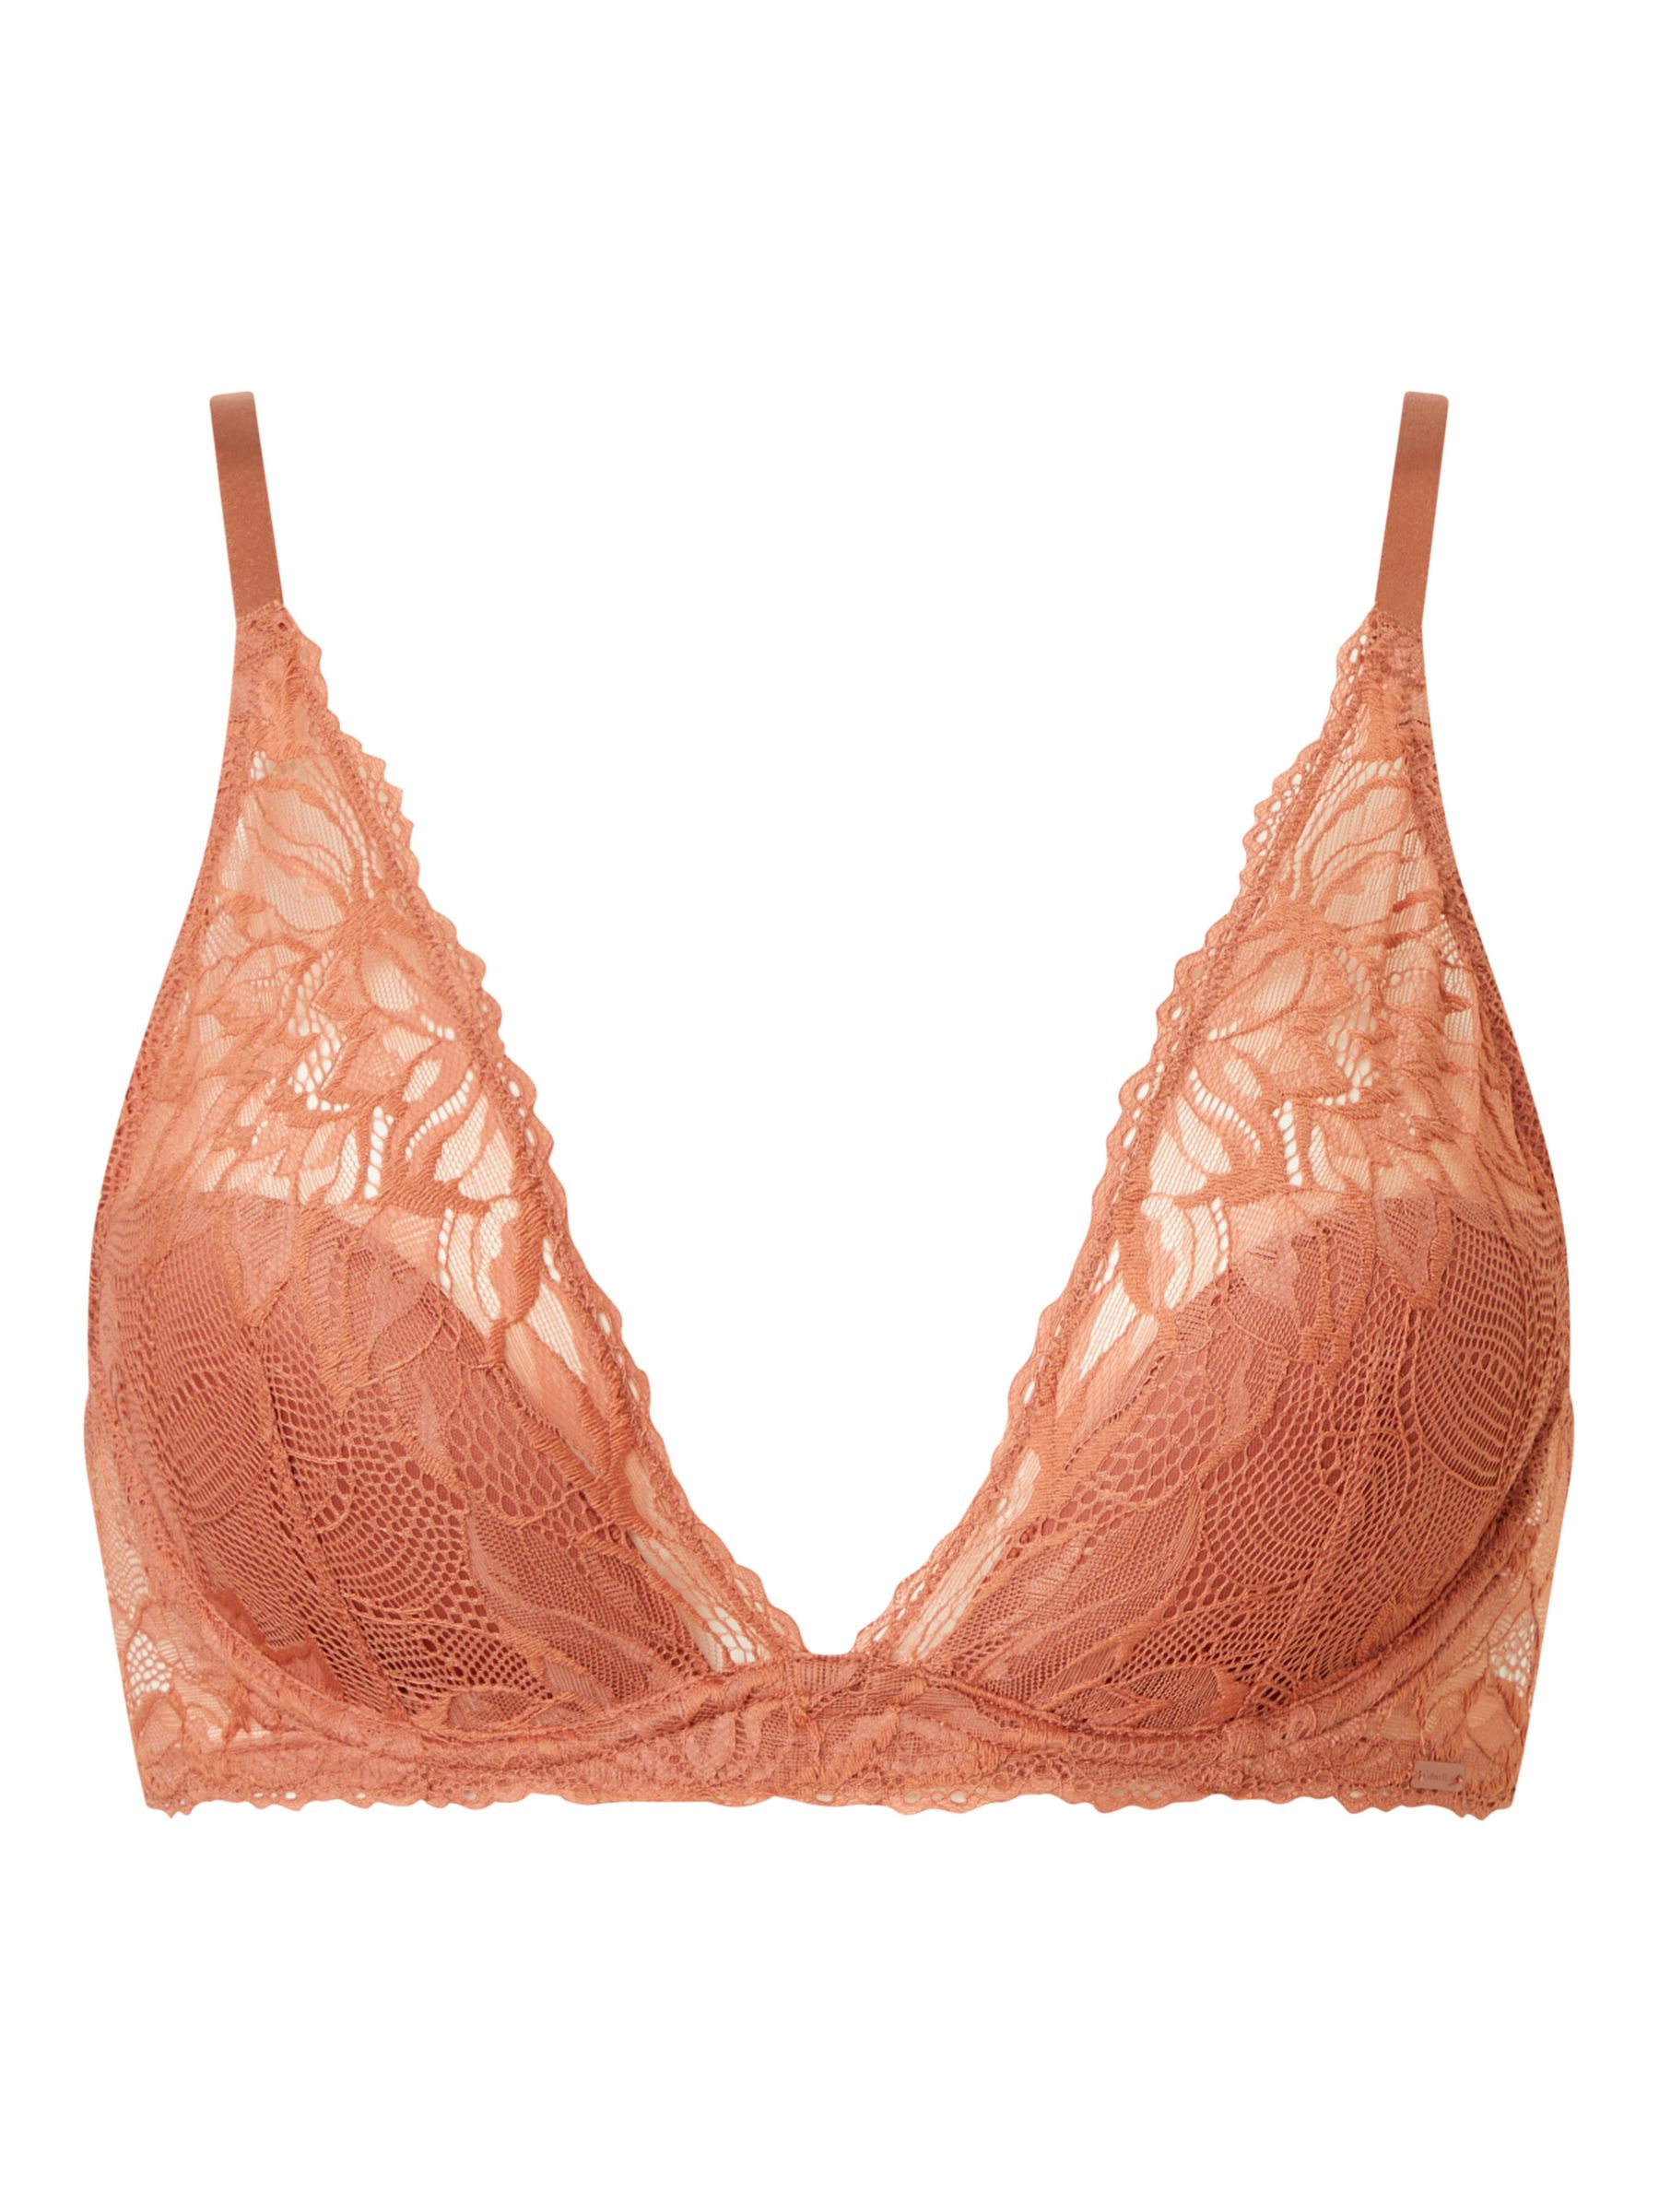 Calvin Klein lightly lined demi bra with lace in sandstone